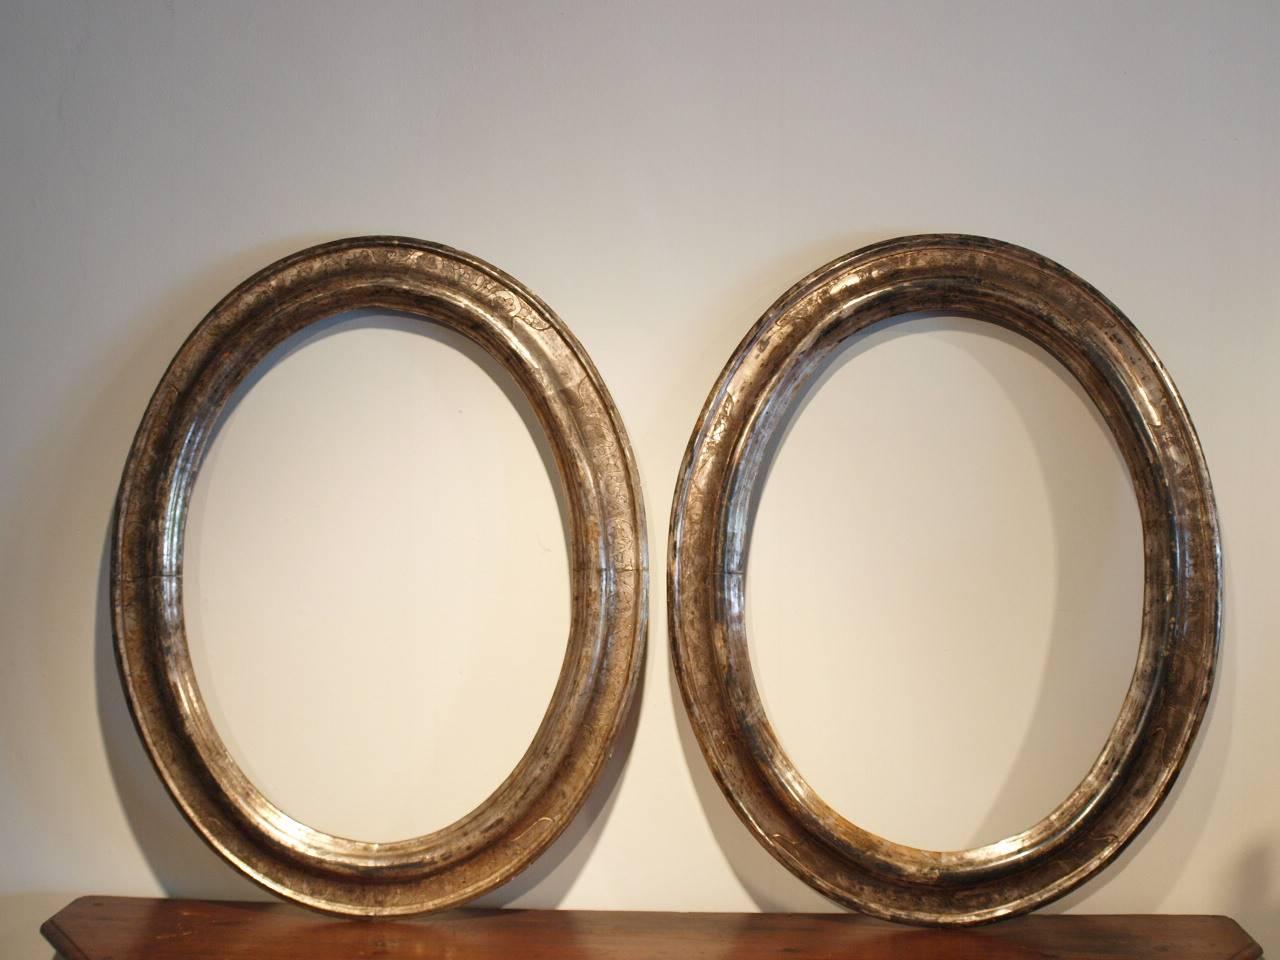 A sensational pair of 18th century silver gilt frames from Northern, Italy. Outstanding quality and patina. Terrific for housing paintings or mirrors.